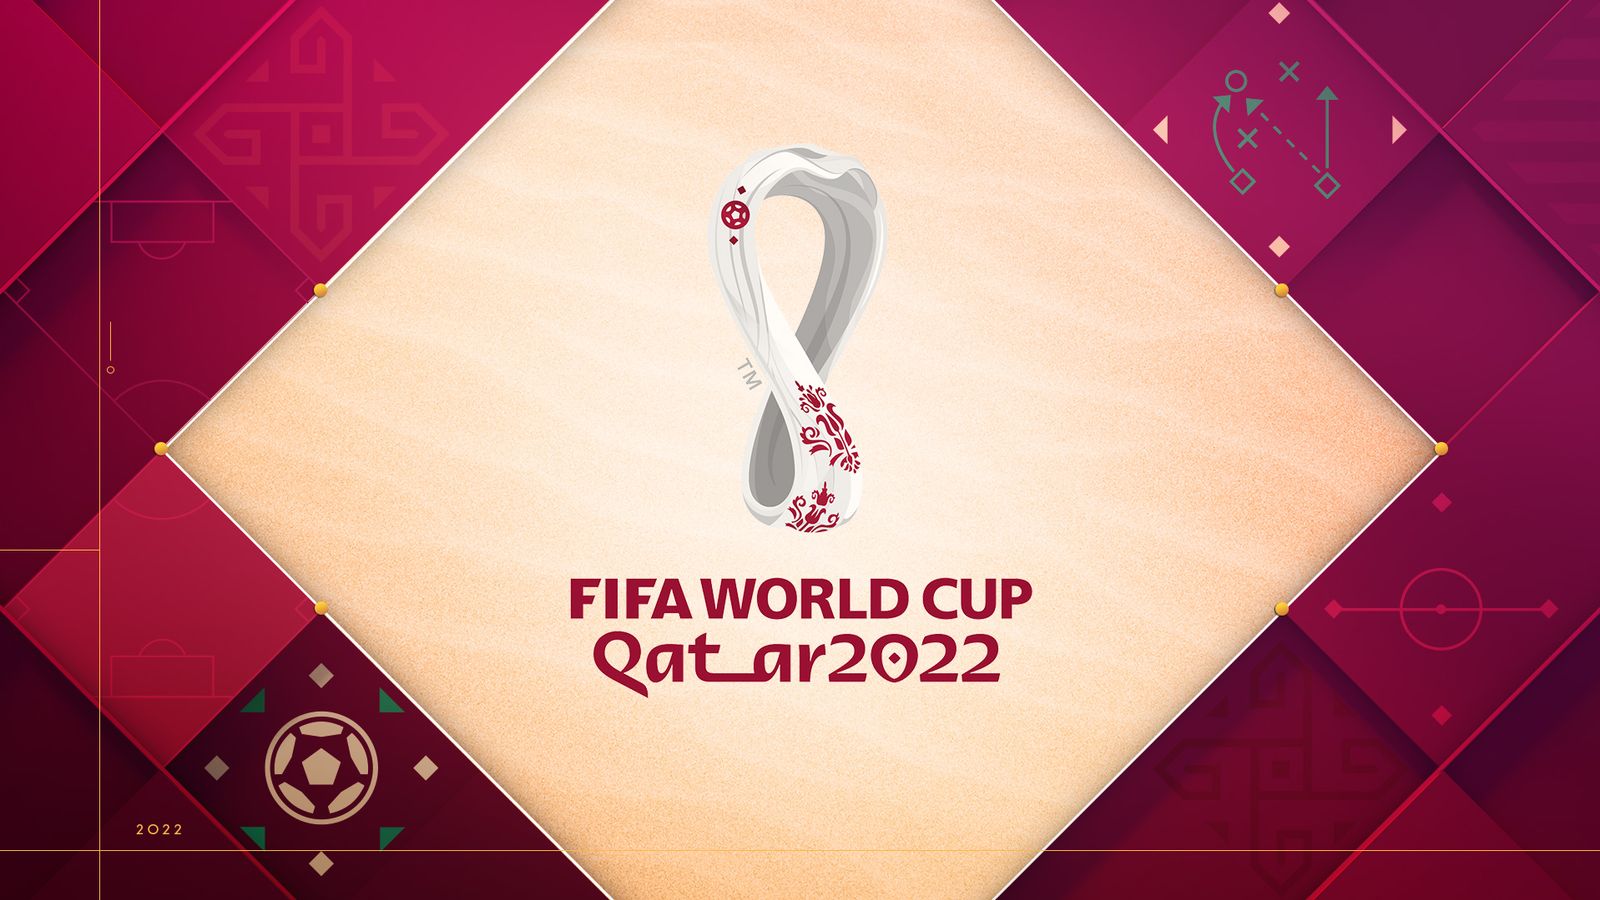 World Cup 2022 and crypto